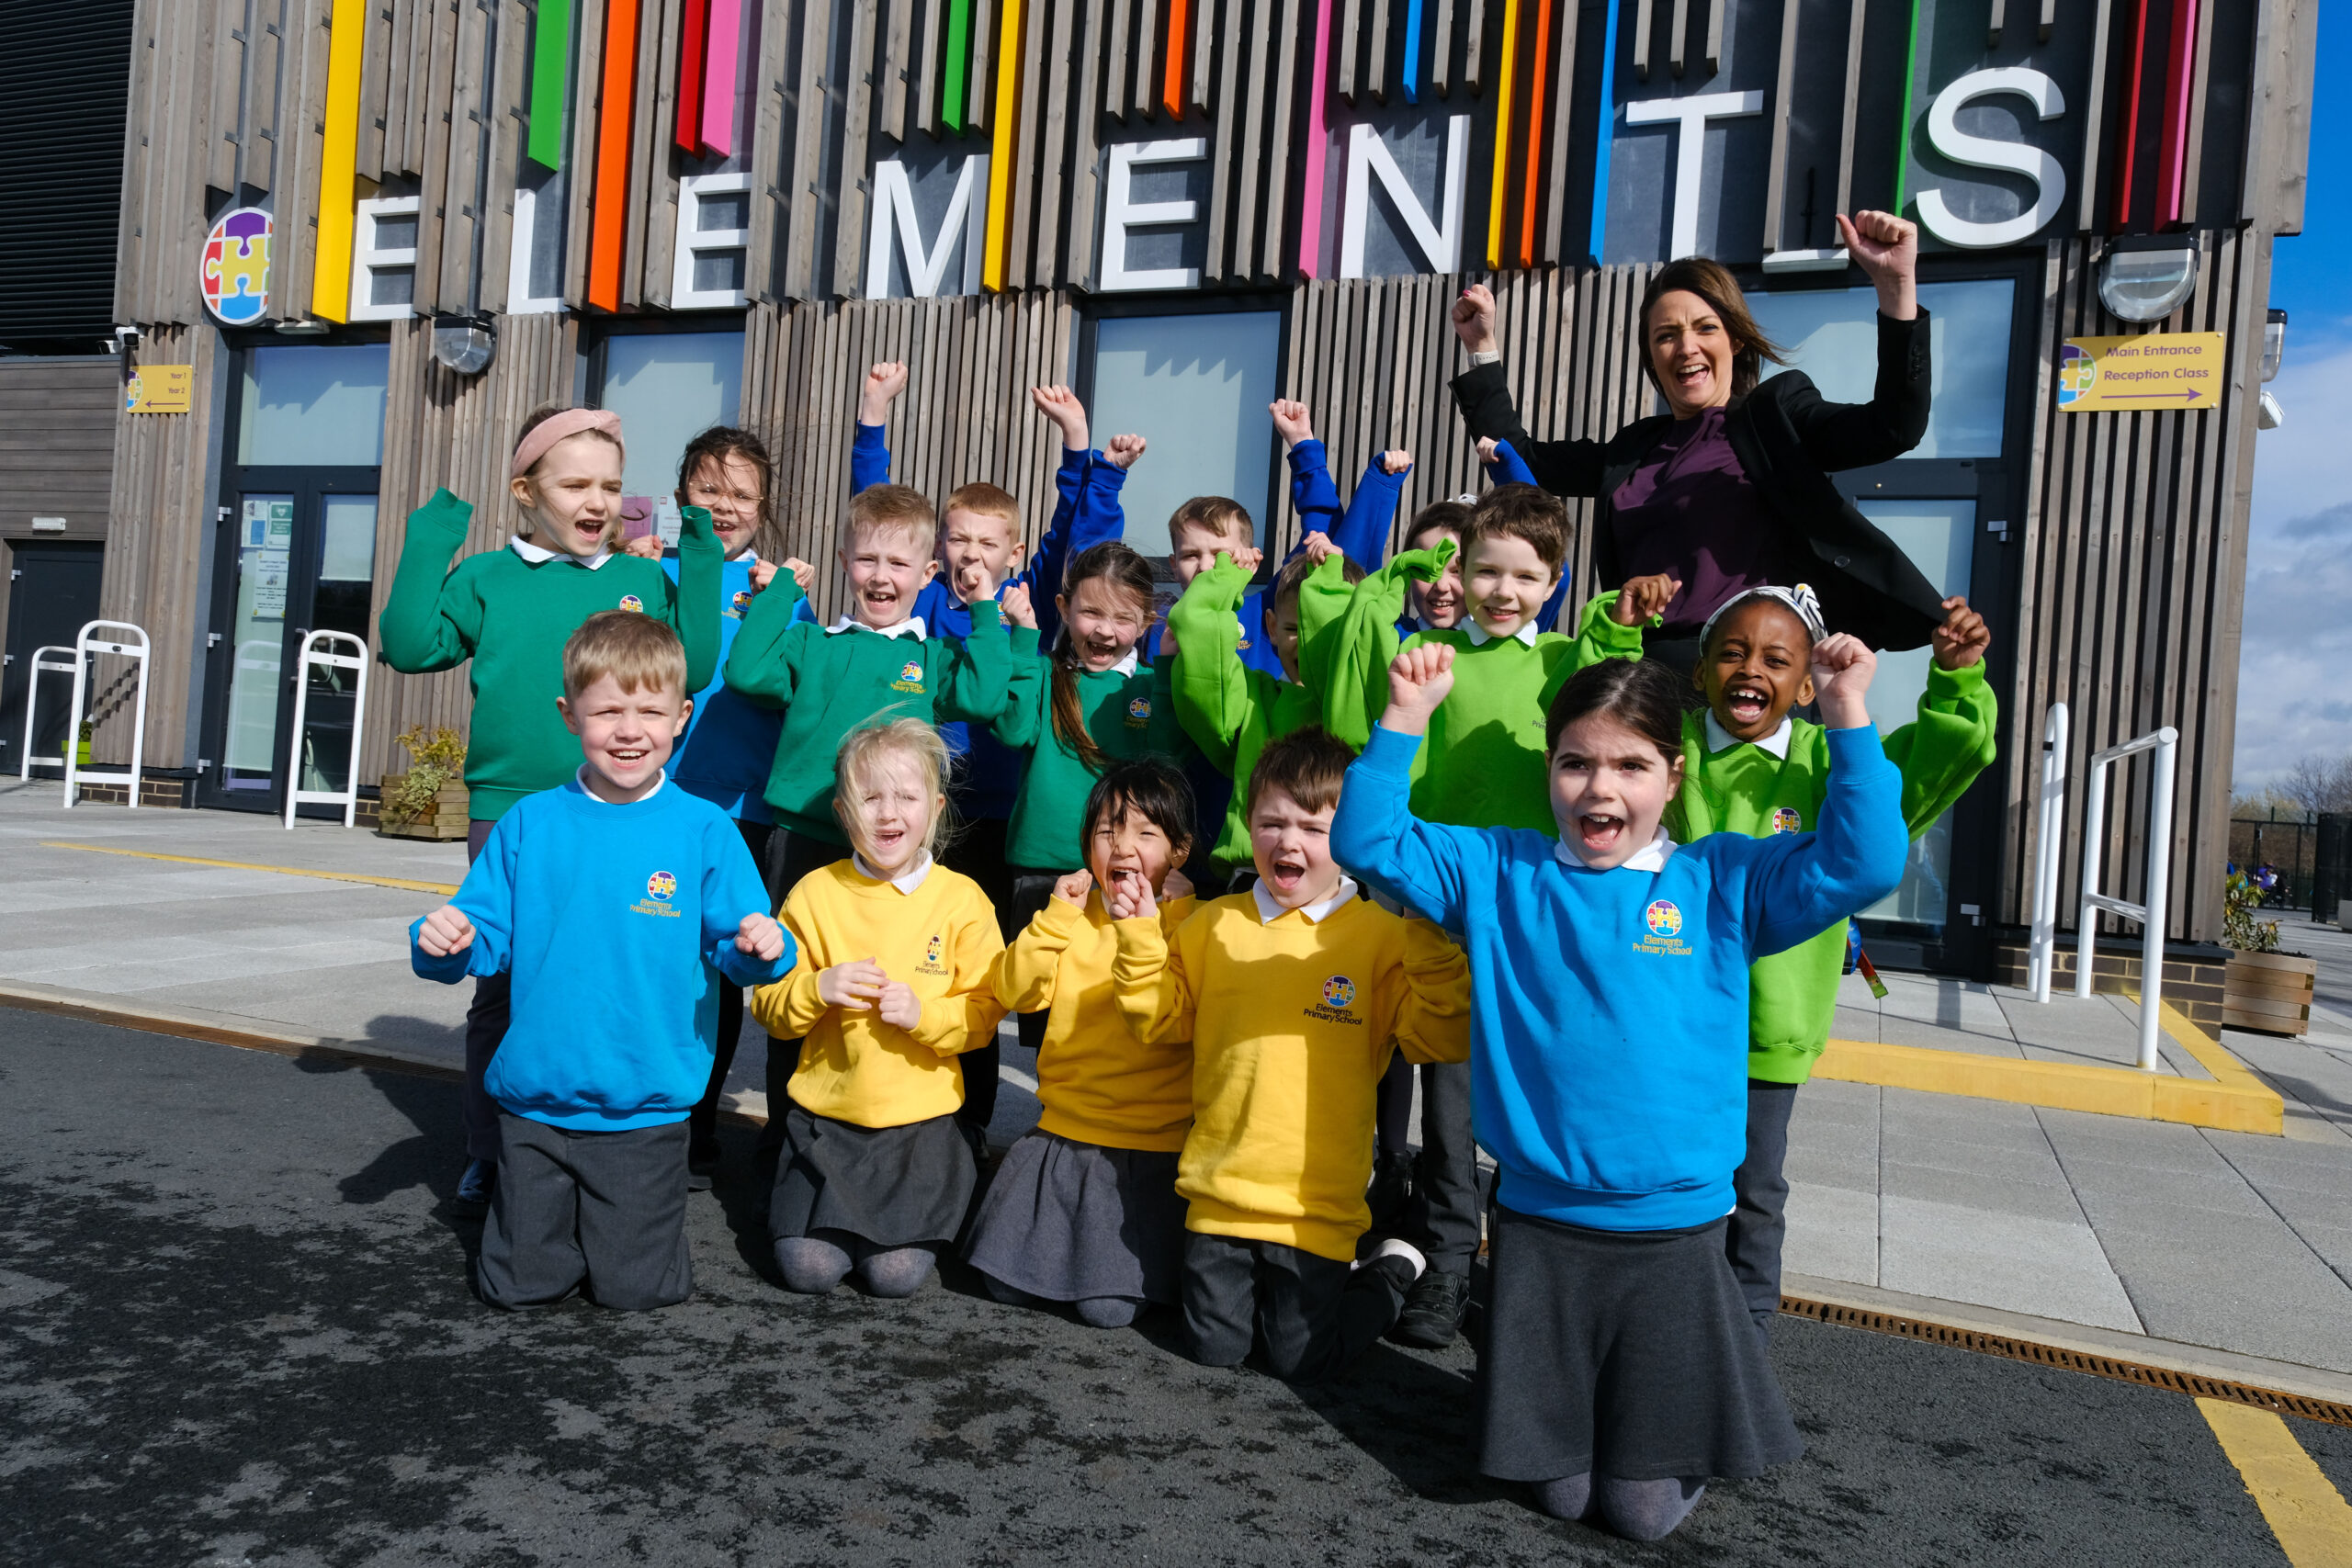 Elements Primary School Rated ‘Good’ in First Ever Inspection